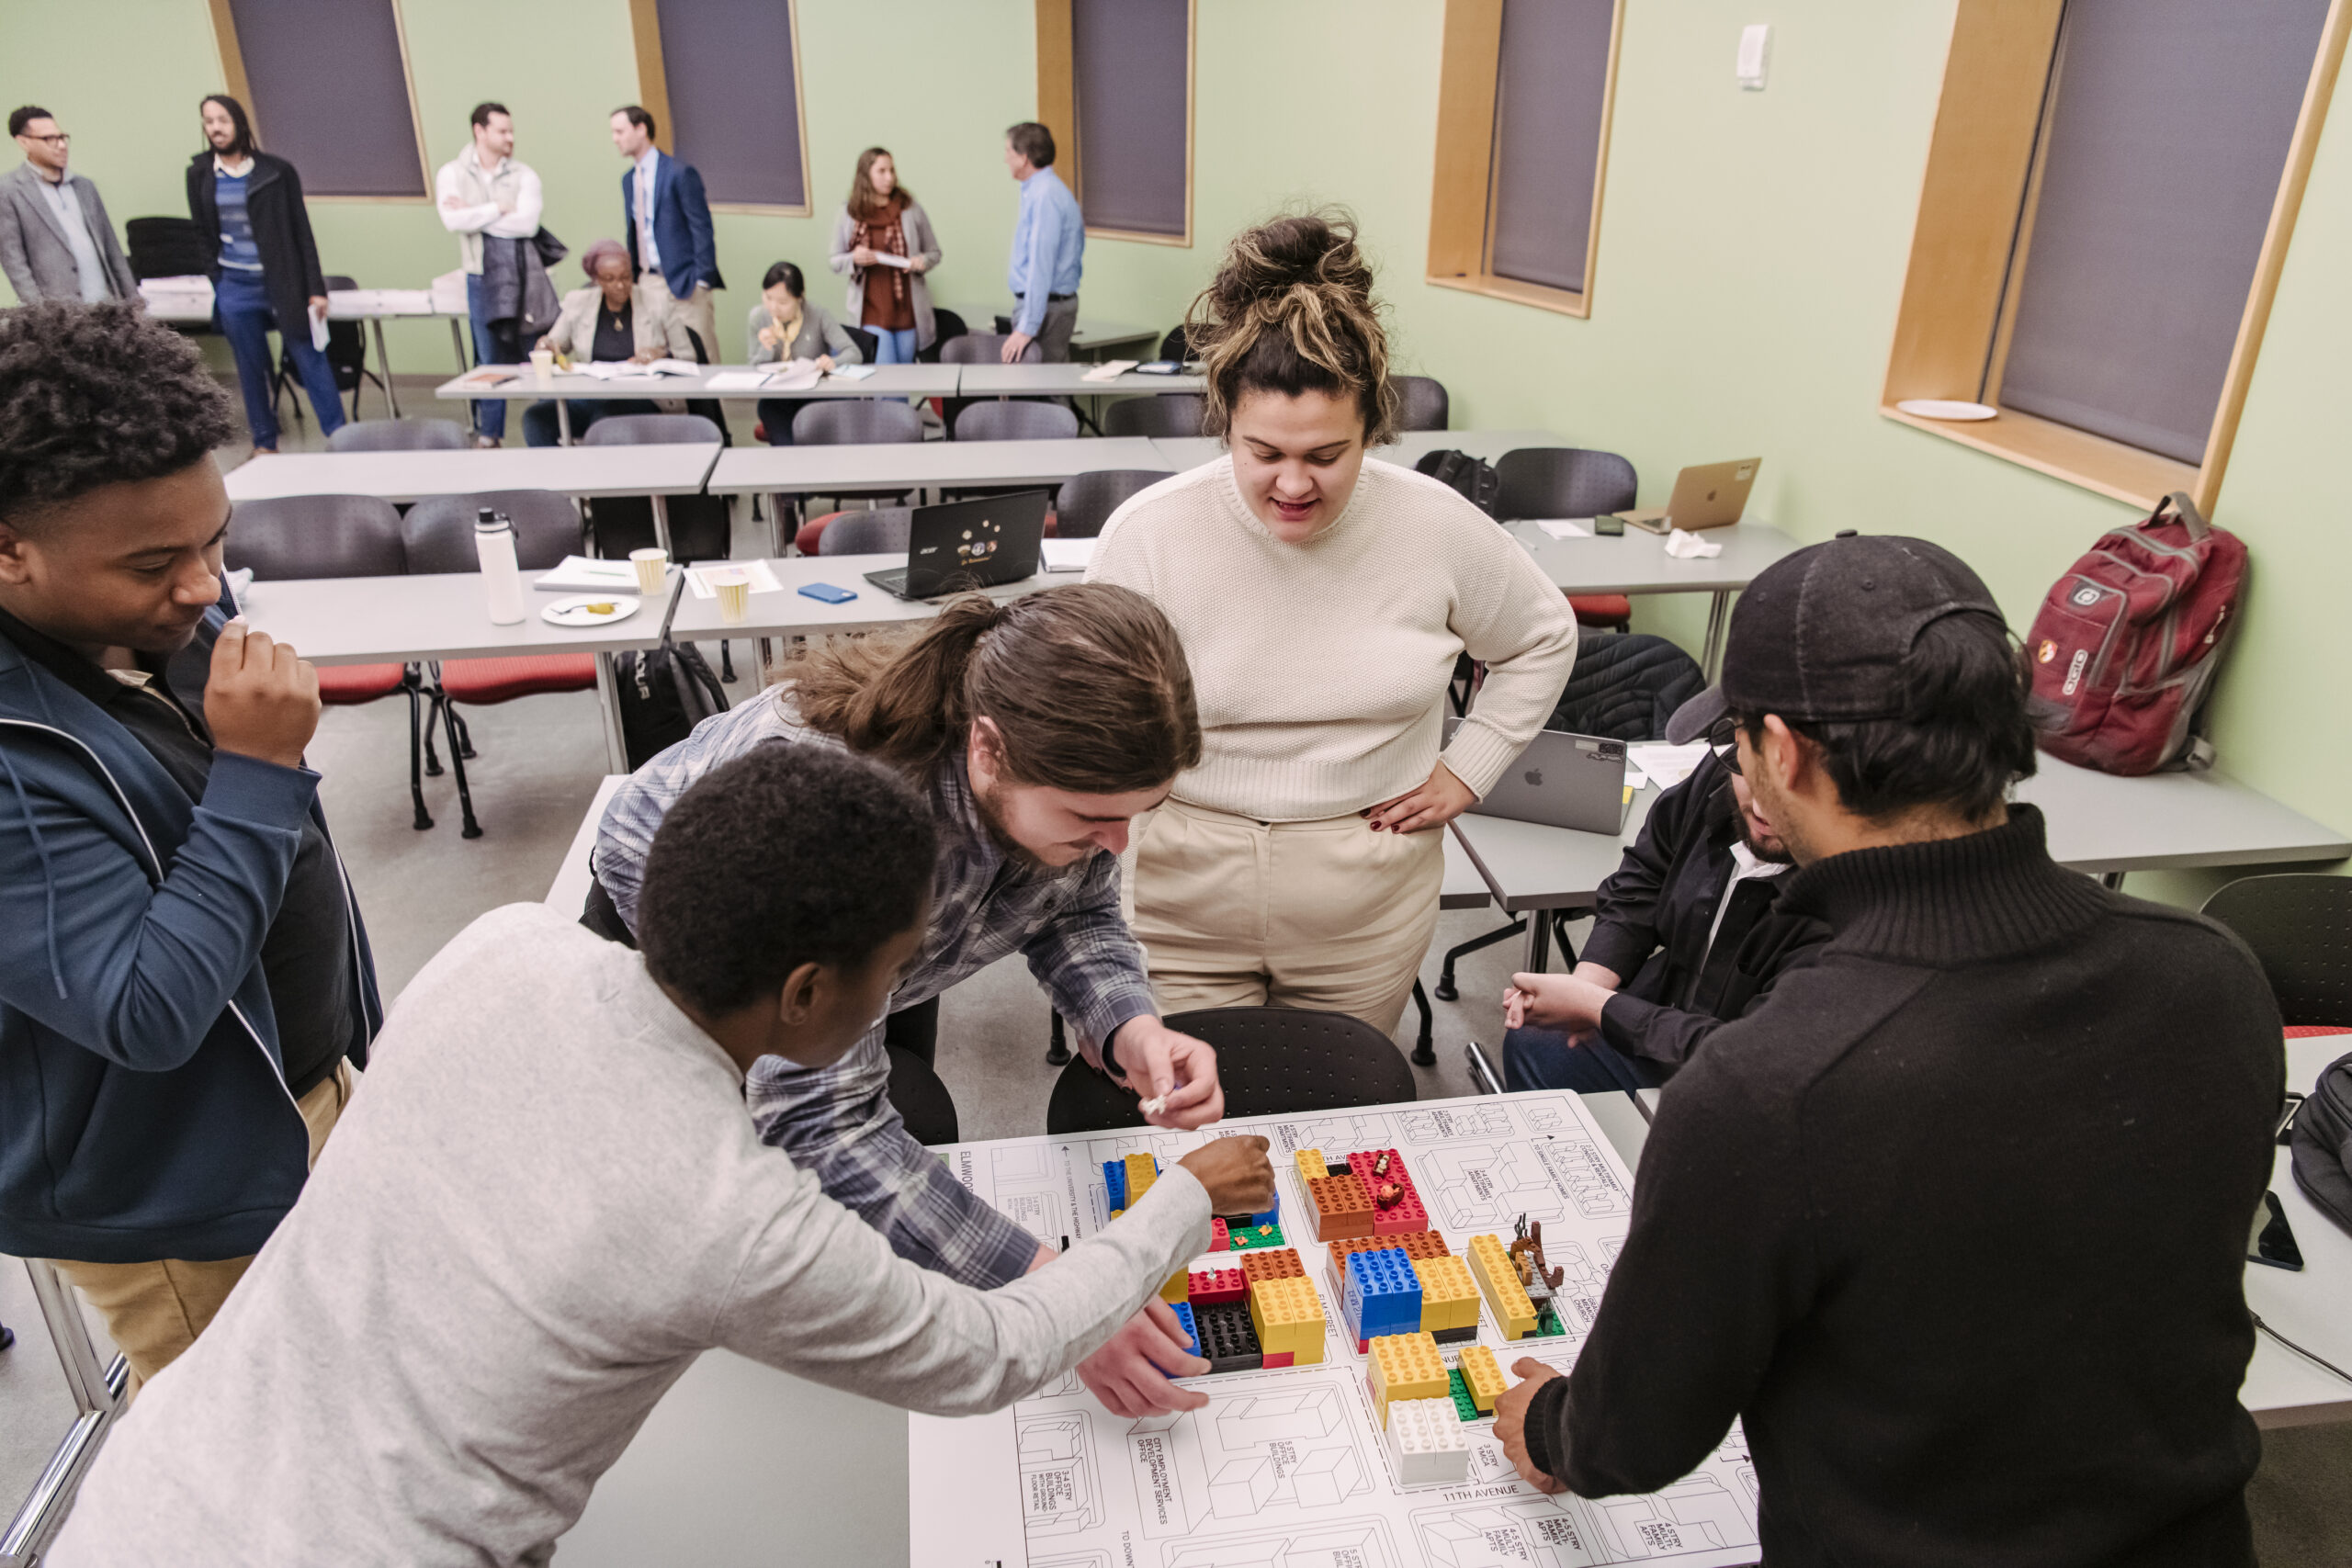 Urban development simulation helps students learn how to balance growth, equity, and environmental sustainability 